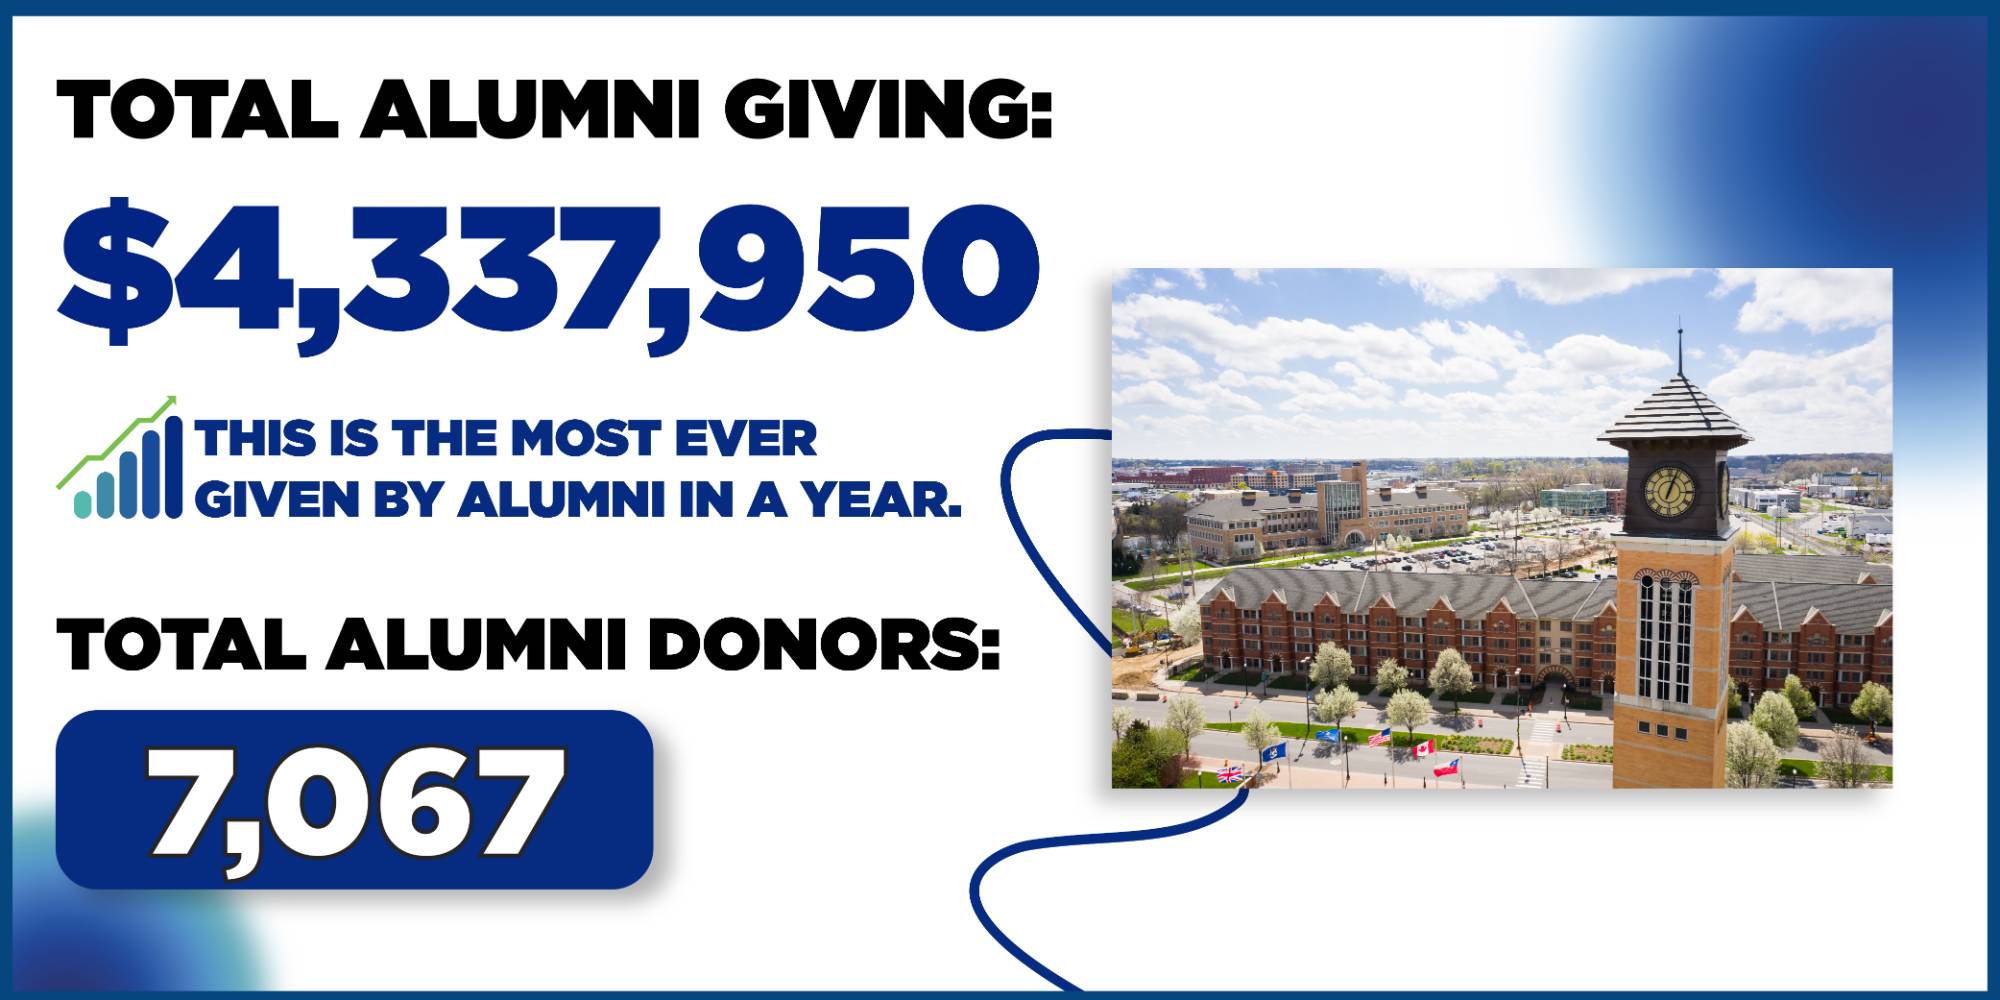 Total Alumni Giving: $4,337,950. This is the most ever given by alumni in a year. Total Alumni Donors: 7,067. A picture of the downtown Beckering Carillon Tower on a sunny day is shown to the right of the numeric information.